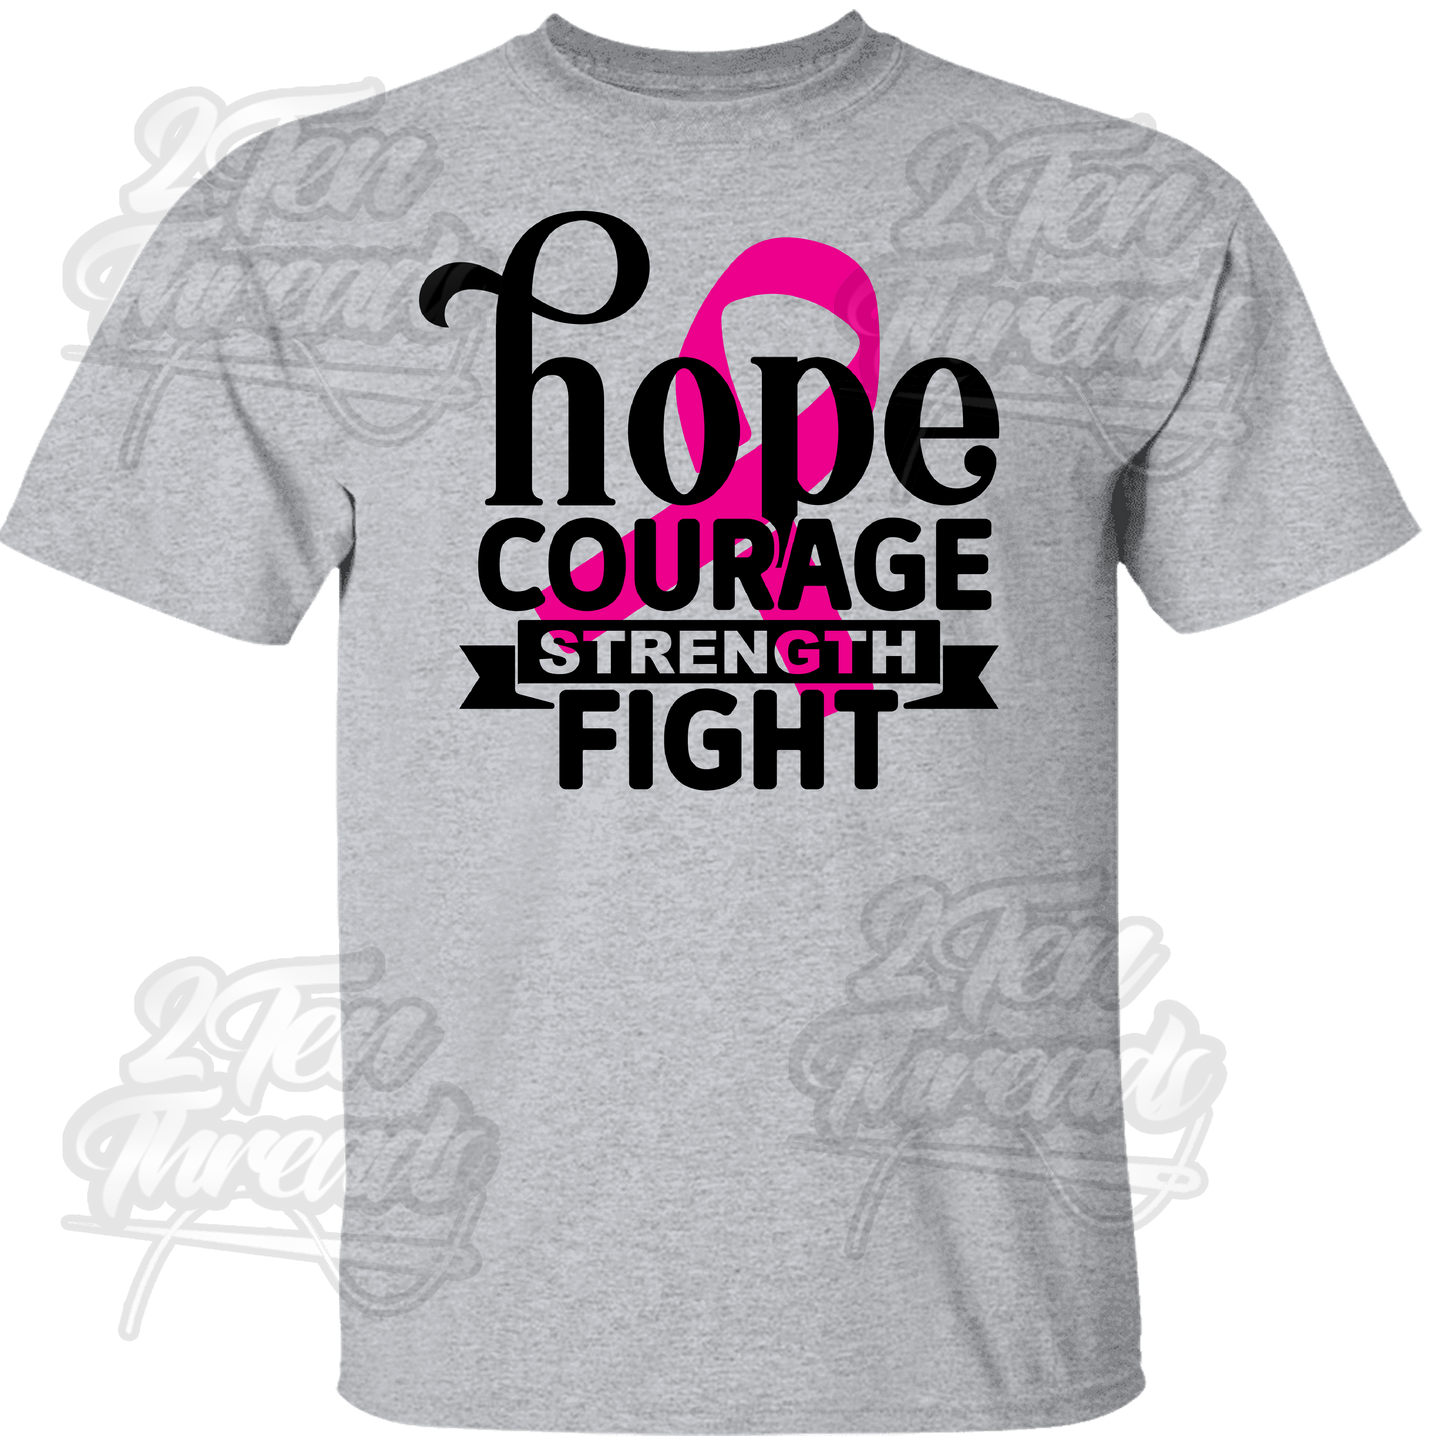 Hope Courage Strenght Fight Shirt